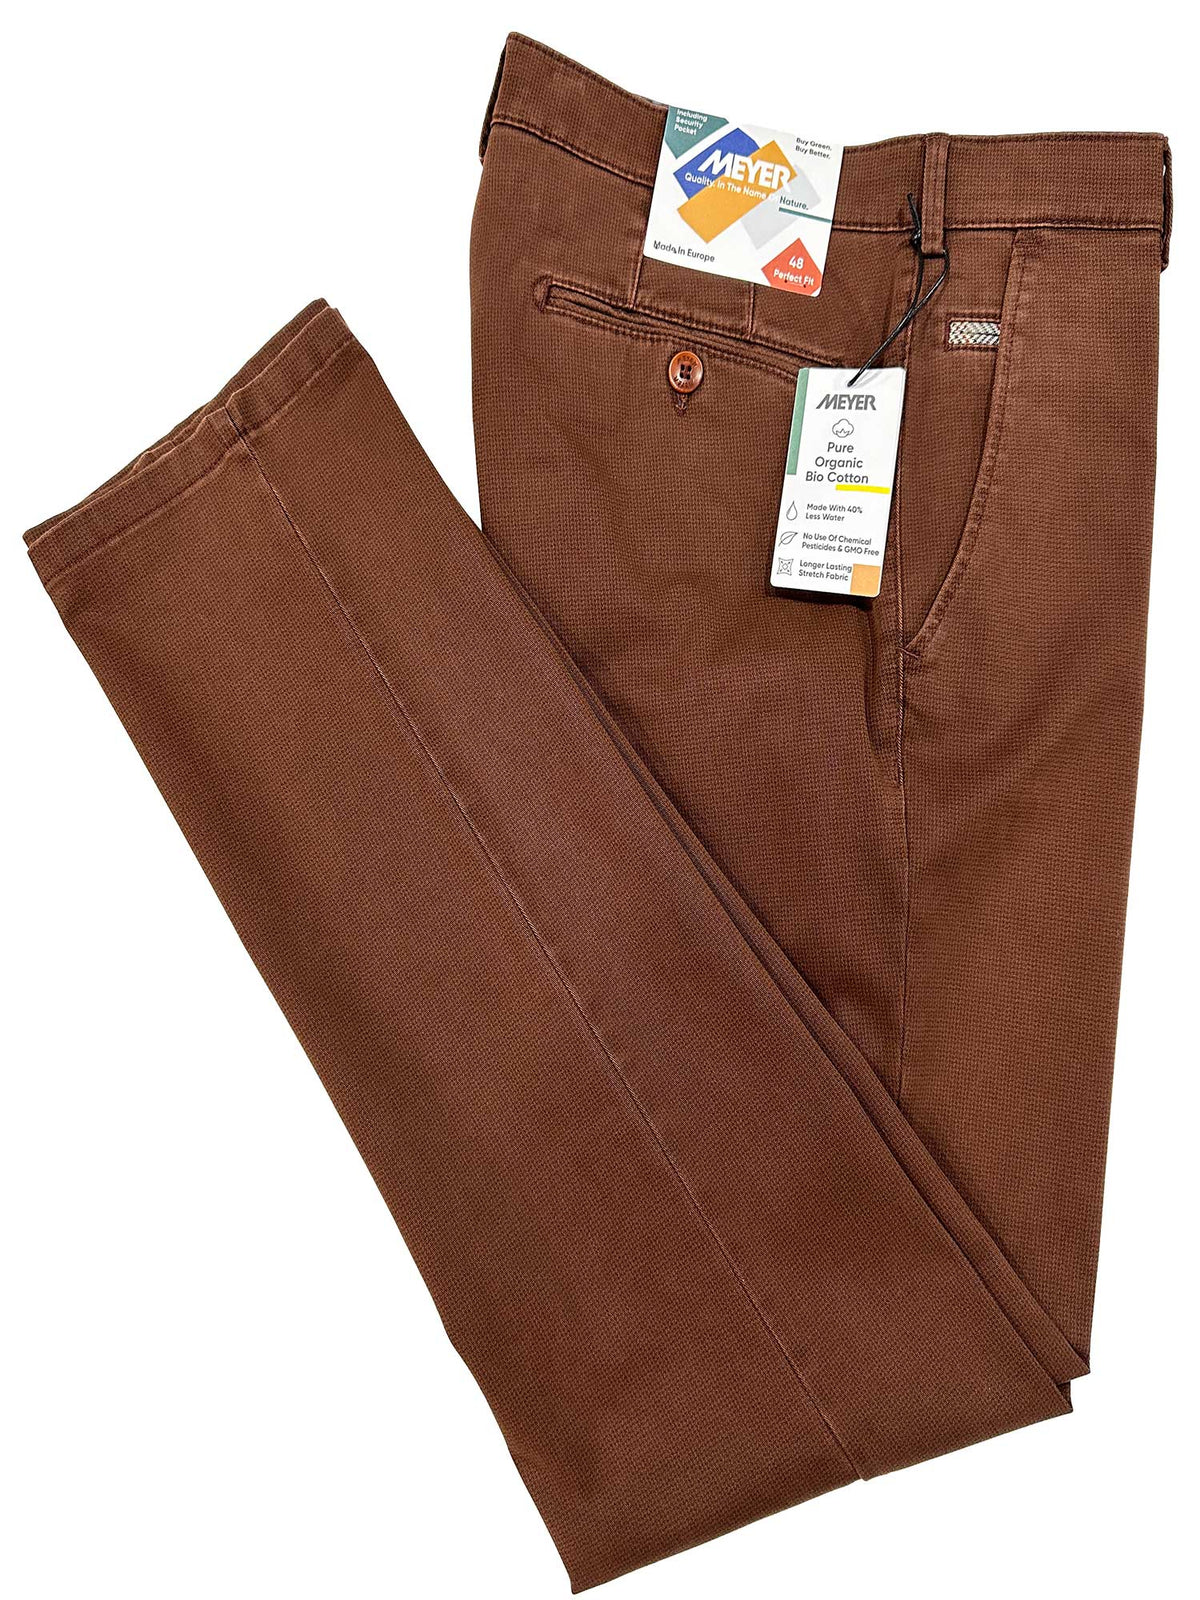 Meyer Casual Trousers are the perfect fit Invisible comfort created by high-performance super-stretch fabrics. 97% Cotton 3% Elastane Made in Romania Two side pockets with rear jetted pockets Fob pocket with contrast trim Internal security pocket with zip Full-extension band with metal Clip + 2 buttons for a firm secure fit with a YKK metal zipper. Pockets & seams are all tapped for extra strength & comfort Size is European regular fit- waist 48=34", 50=35" 52=36", 54=38", 56=40", 58=42", 60=44"